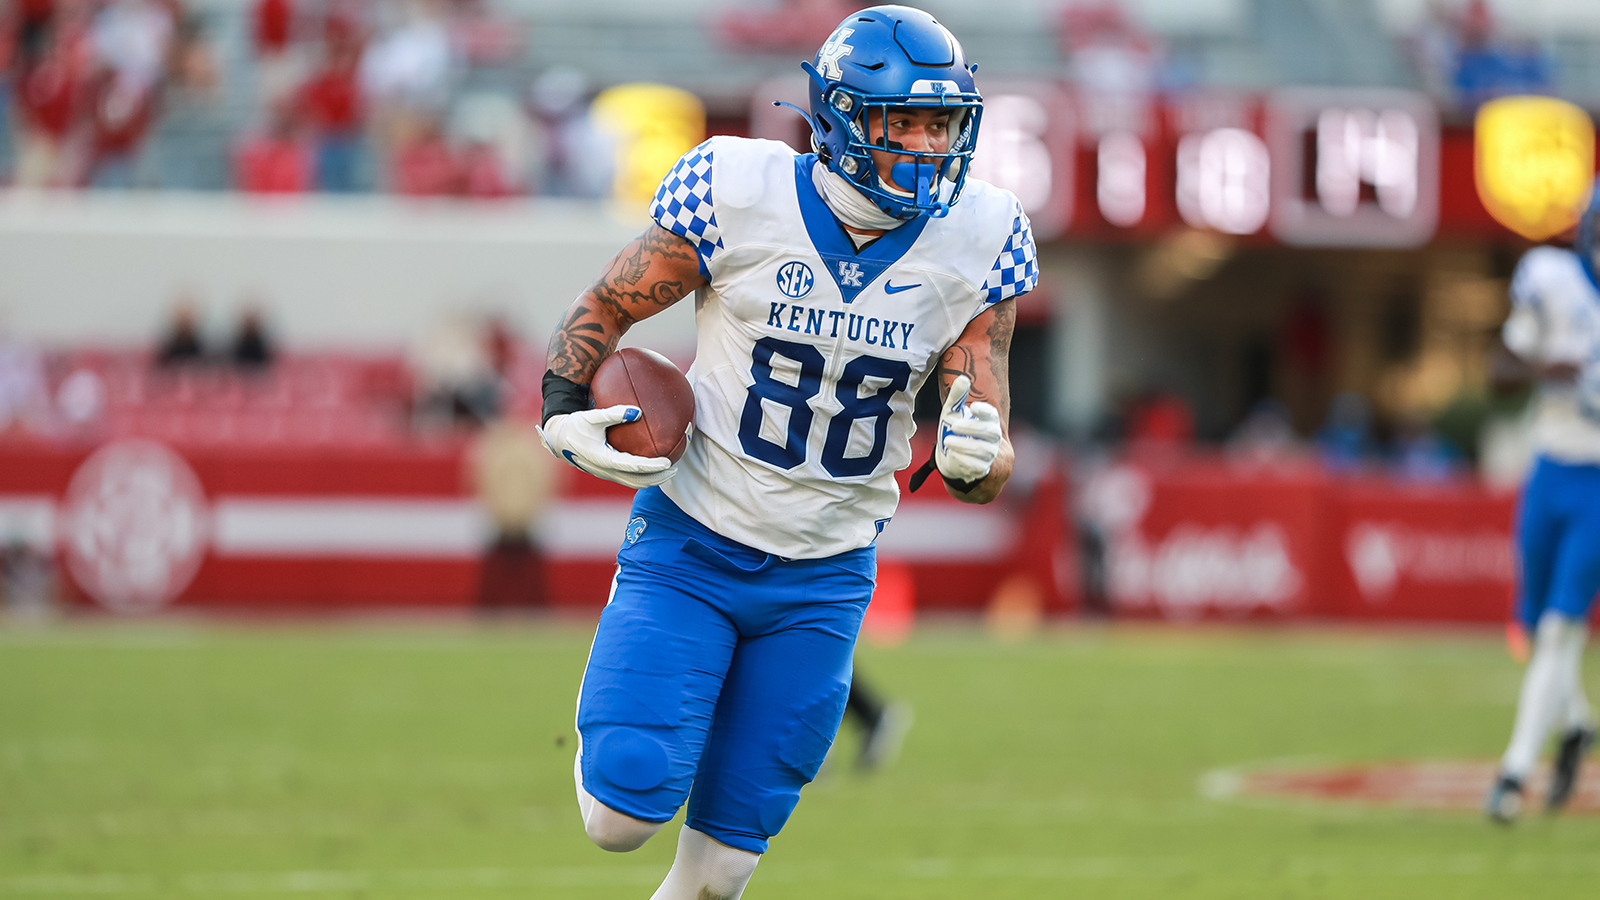 Stoops, Cats Ready to Get Back on Track This Week